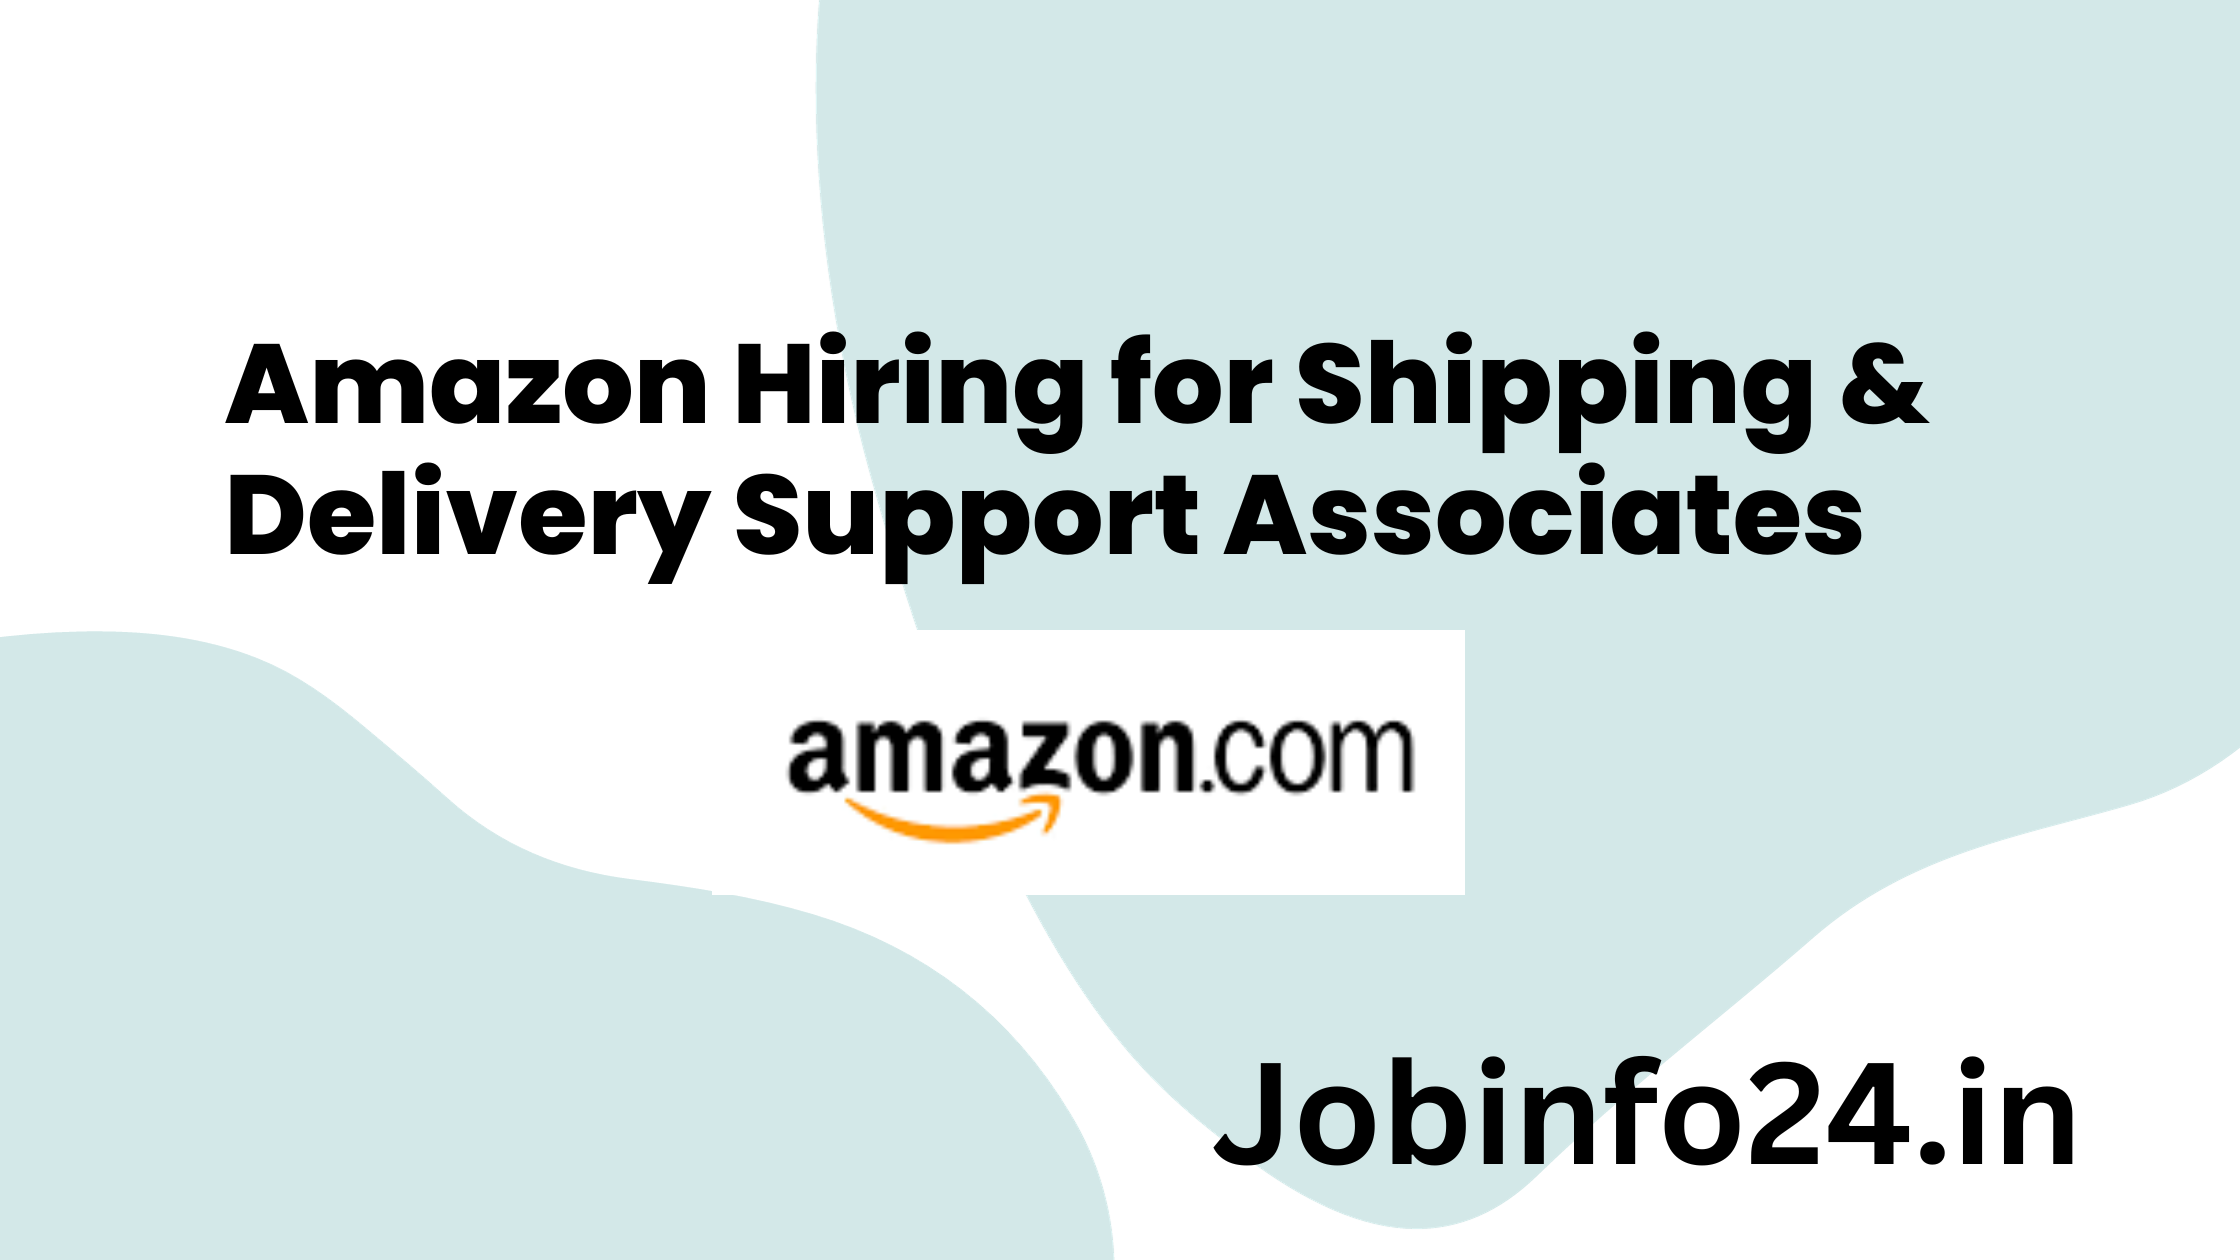 Amazon Hiring for Shipping & Delivery Support Associates 